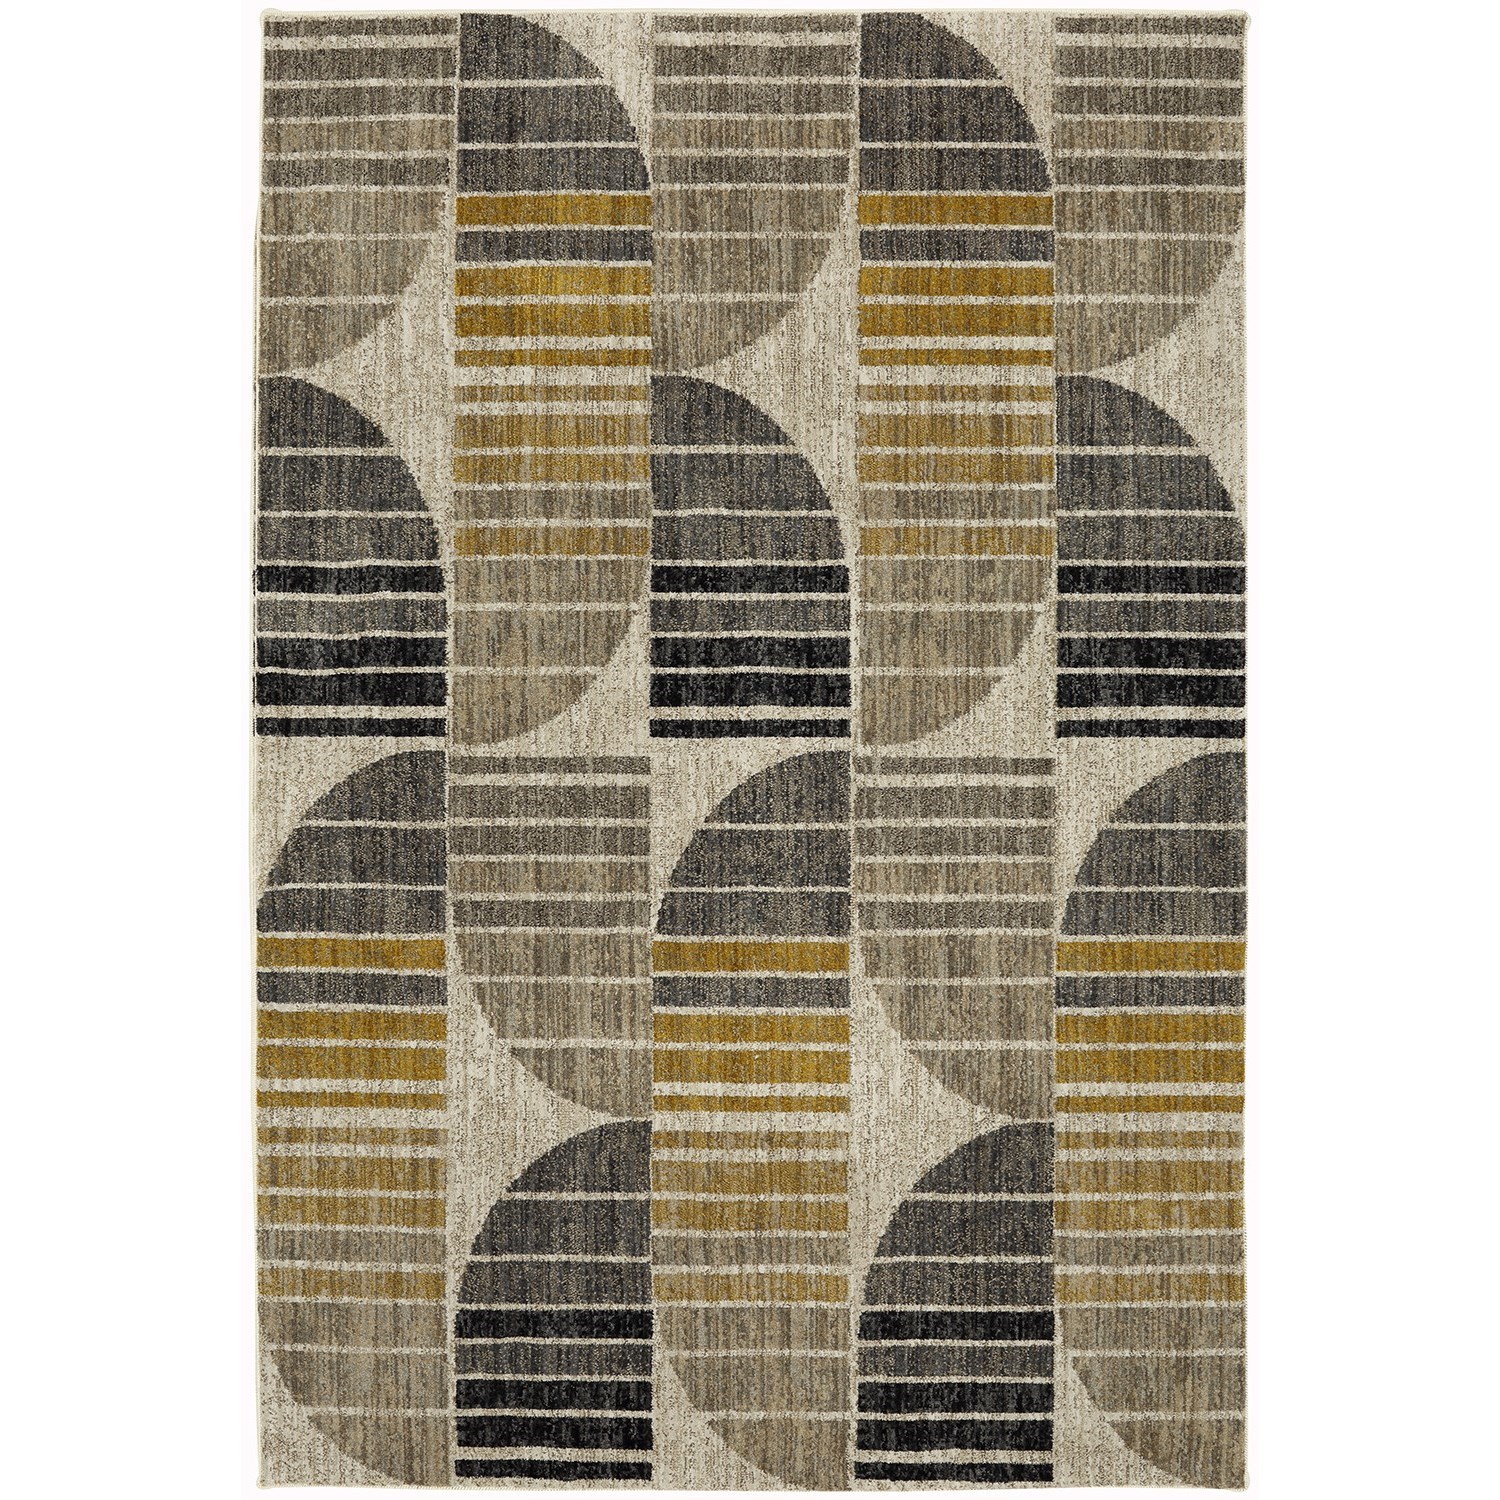 9' 6"x12' 11" Crescent Oyster Area Rug